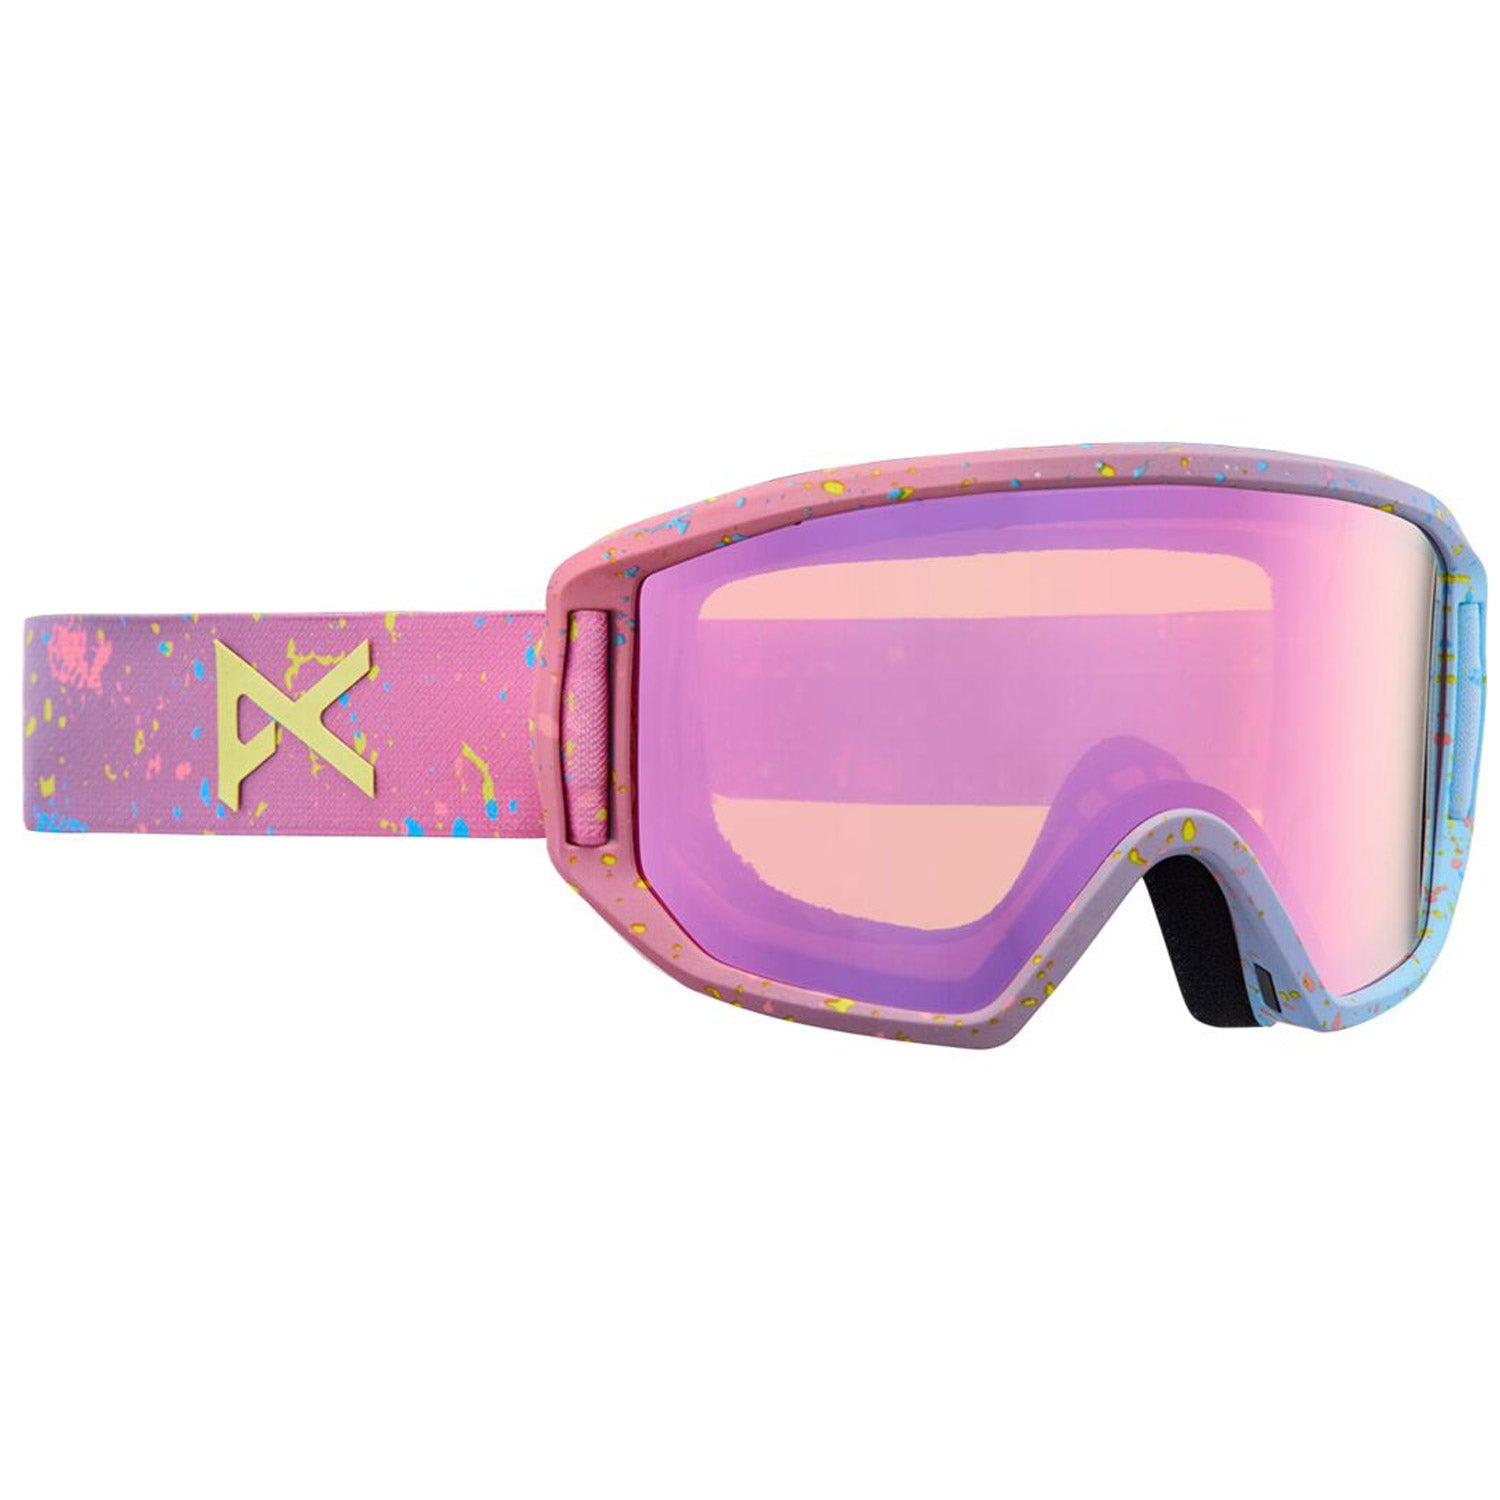 Relapse Jr Snow Goggle